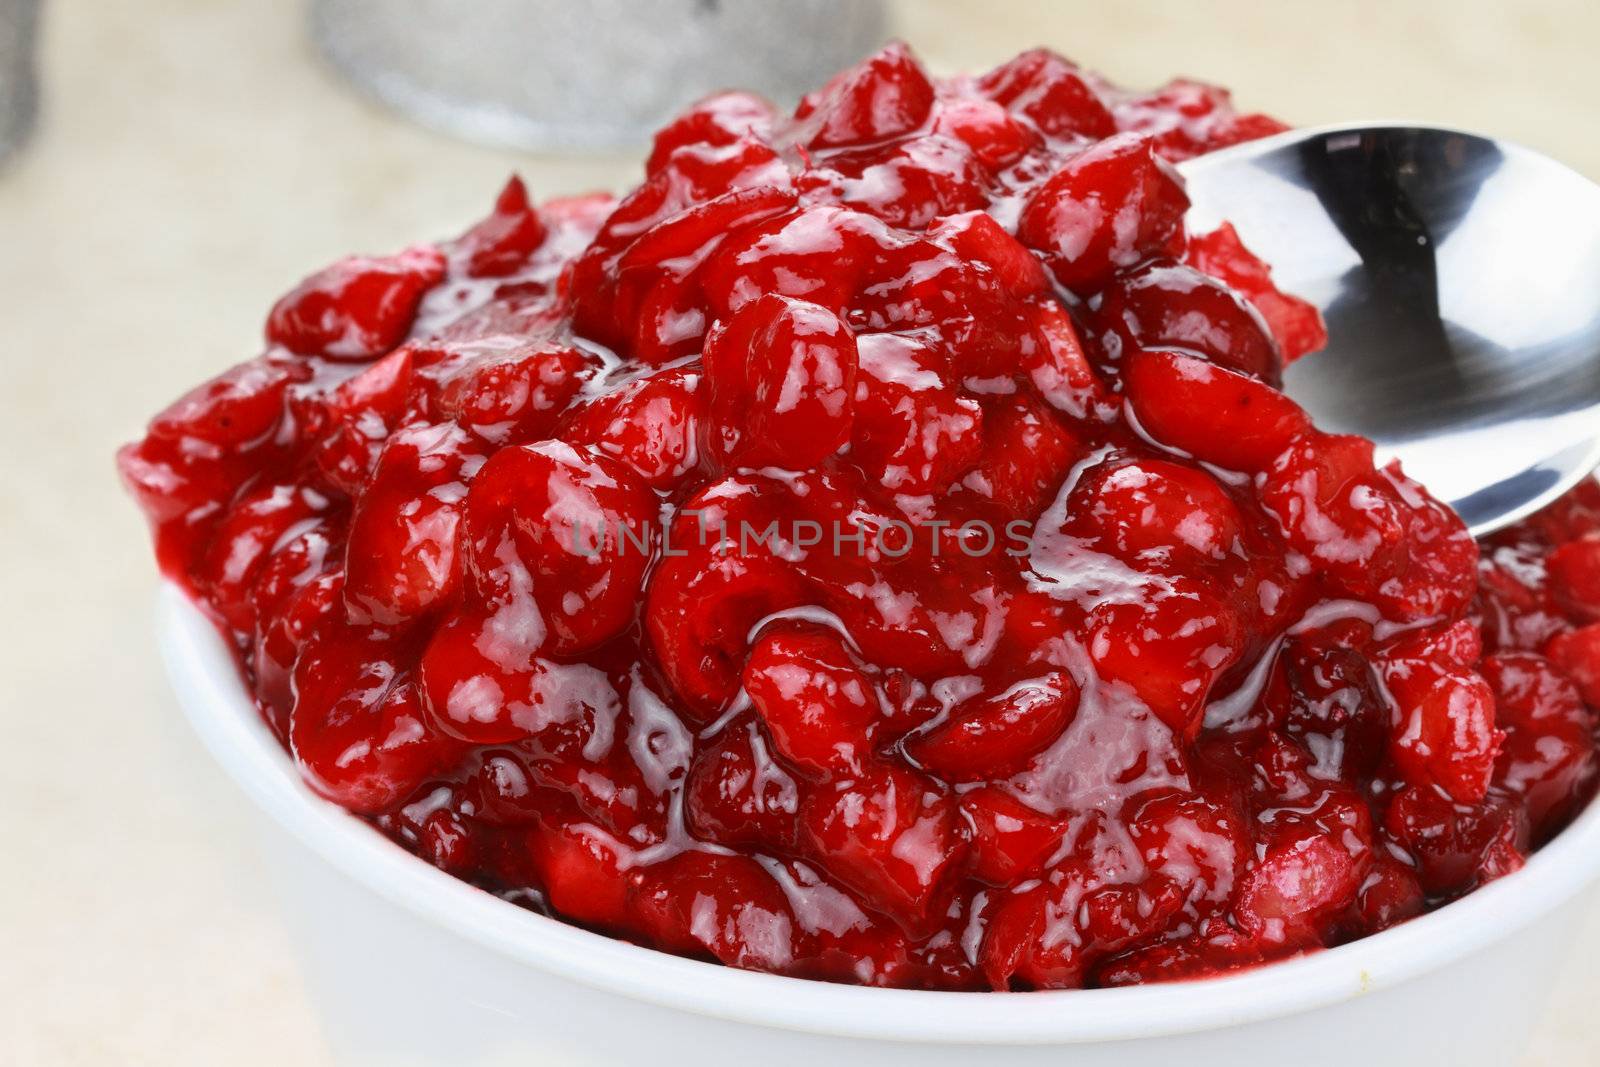 Fresh homemade cranberry relish made from fresh cranberries, pineapples, walnuts and celery.